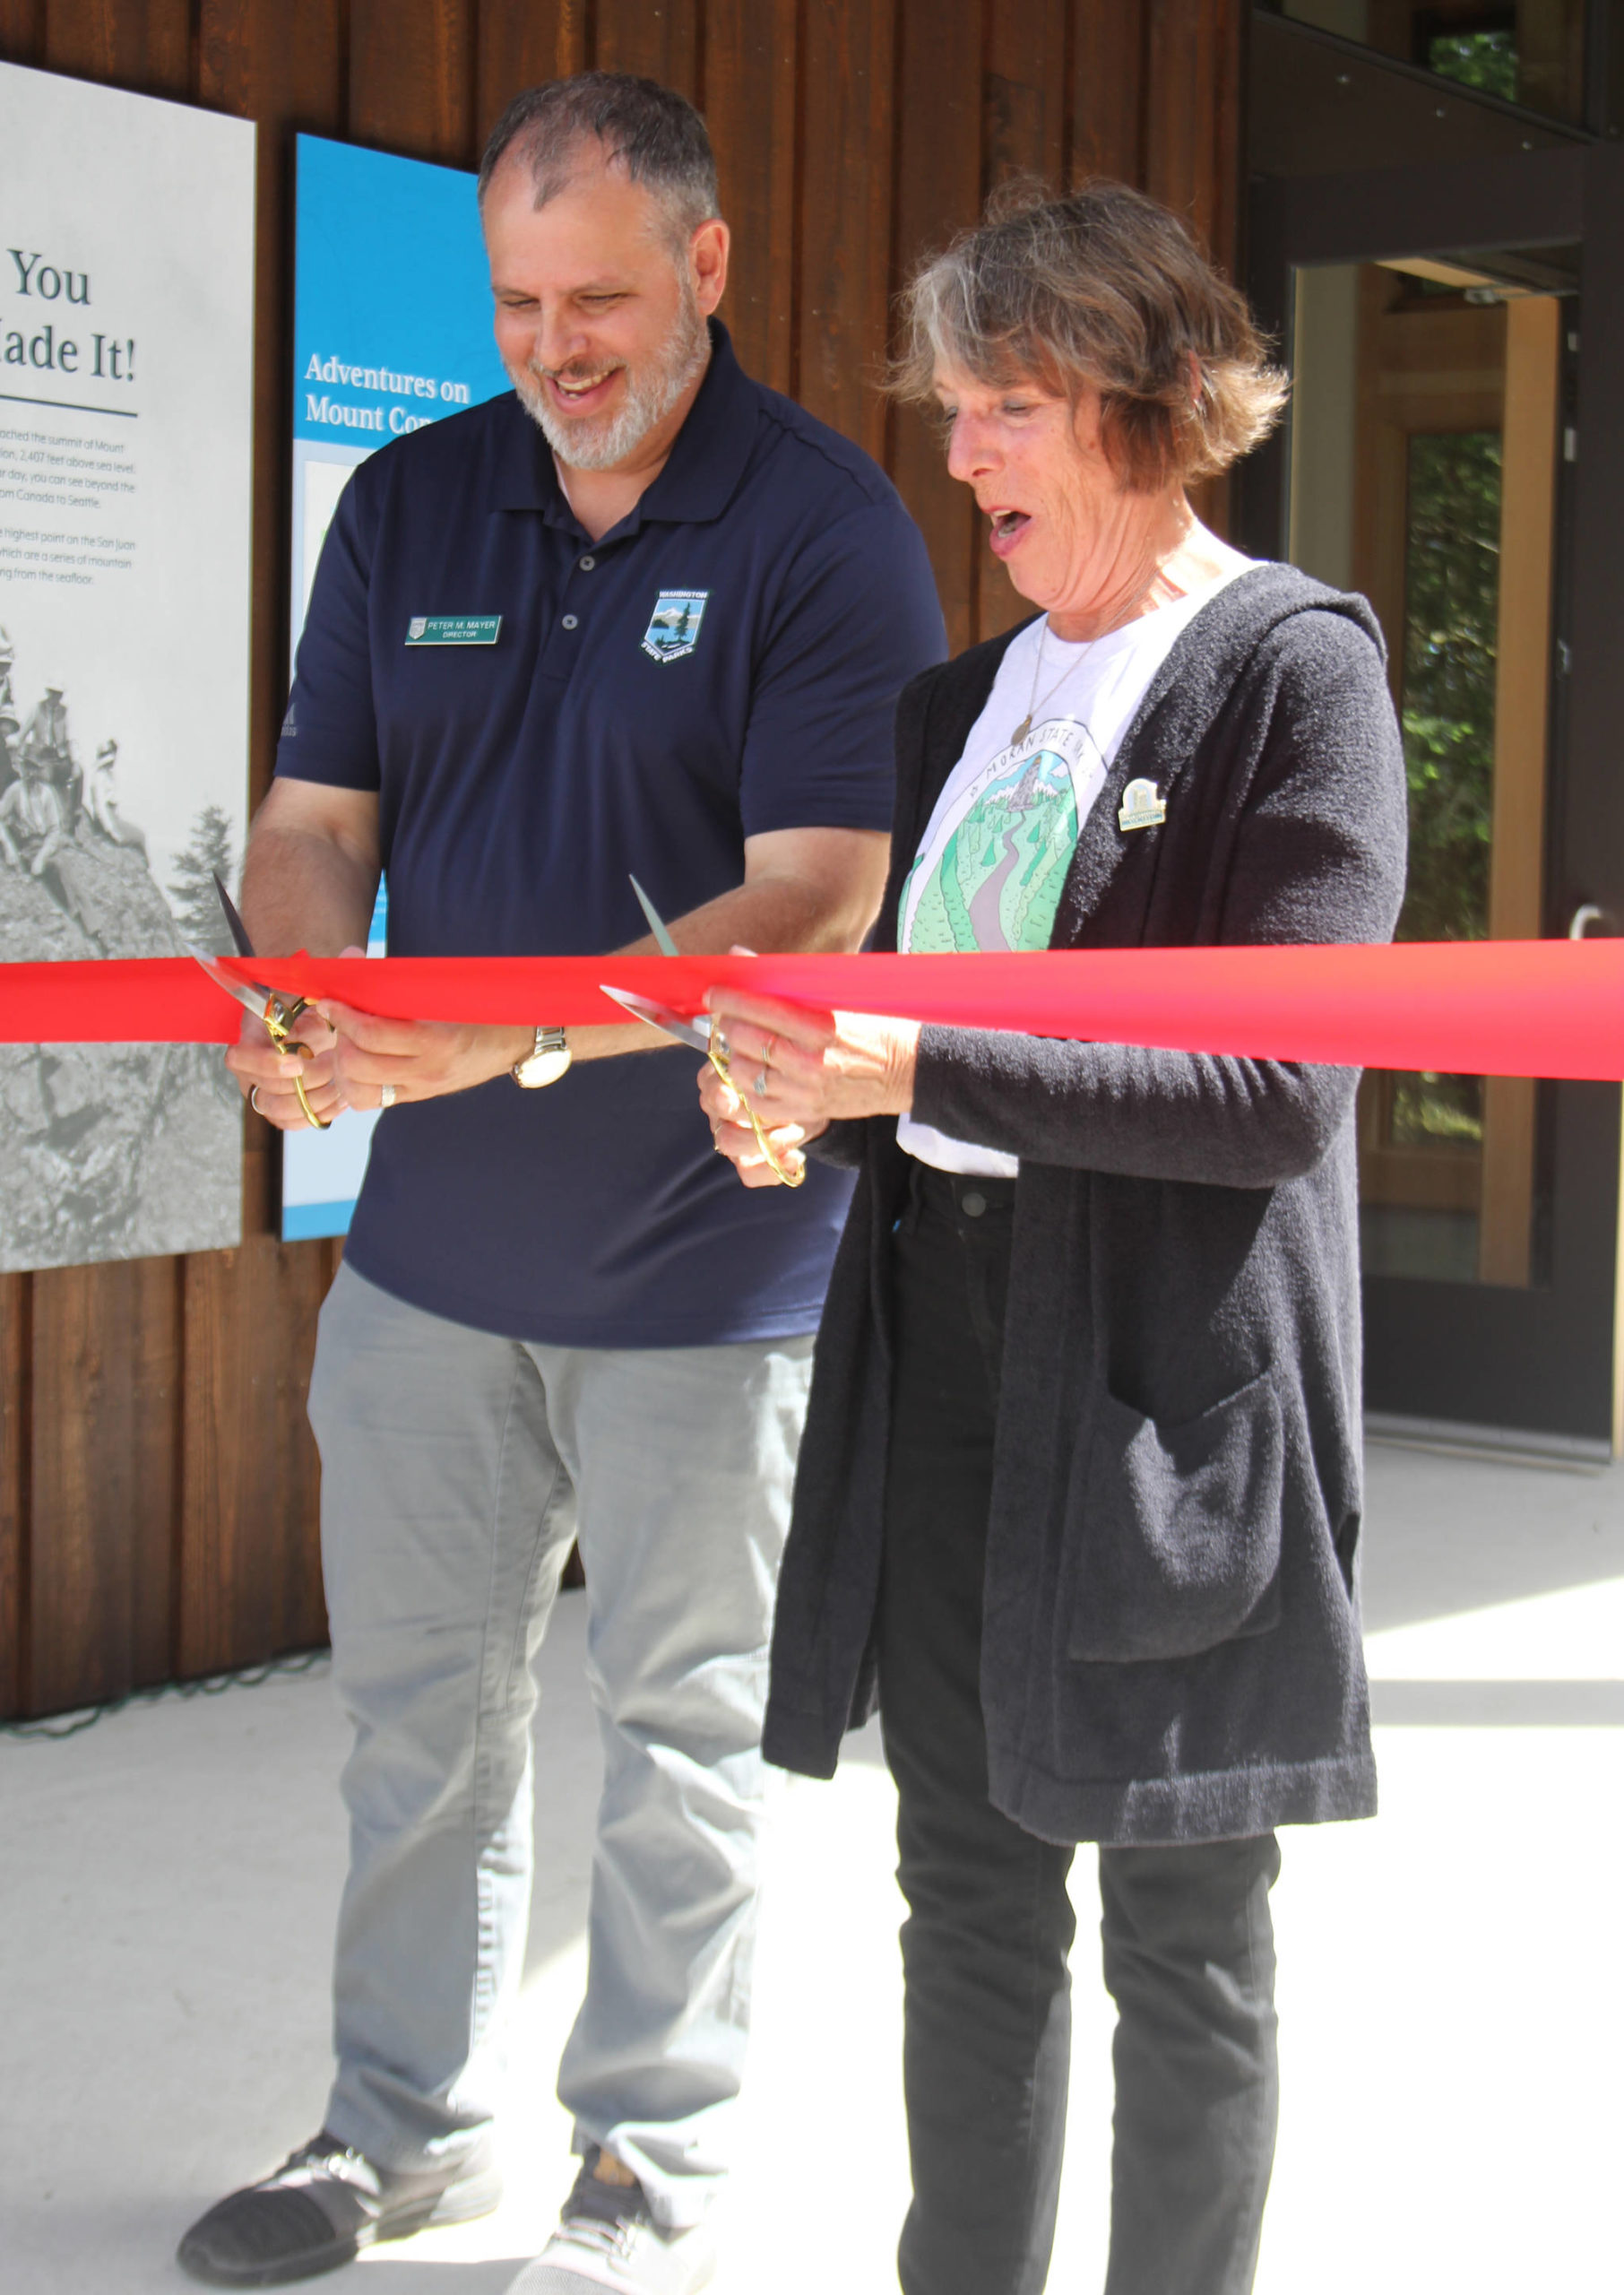 Colleen Smith/staff photo
State Parks Director Peter Mayer and Friends of Moran president Sandi Talt cutting the ribbon to the new visitors’ center on June 18.